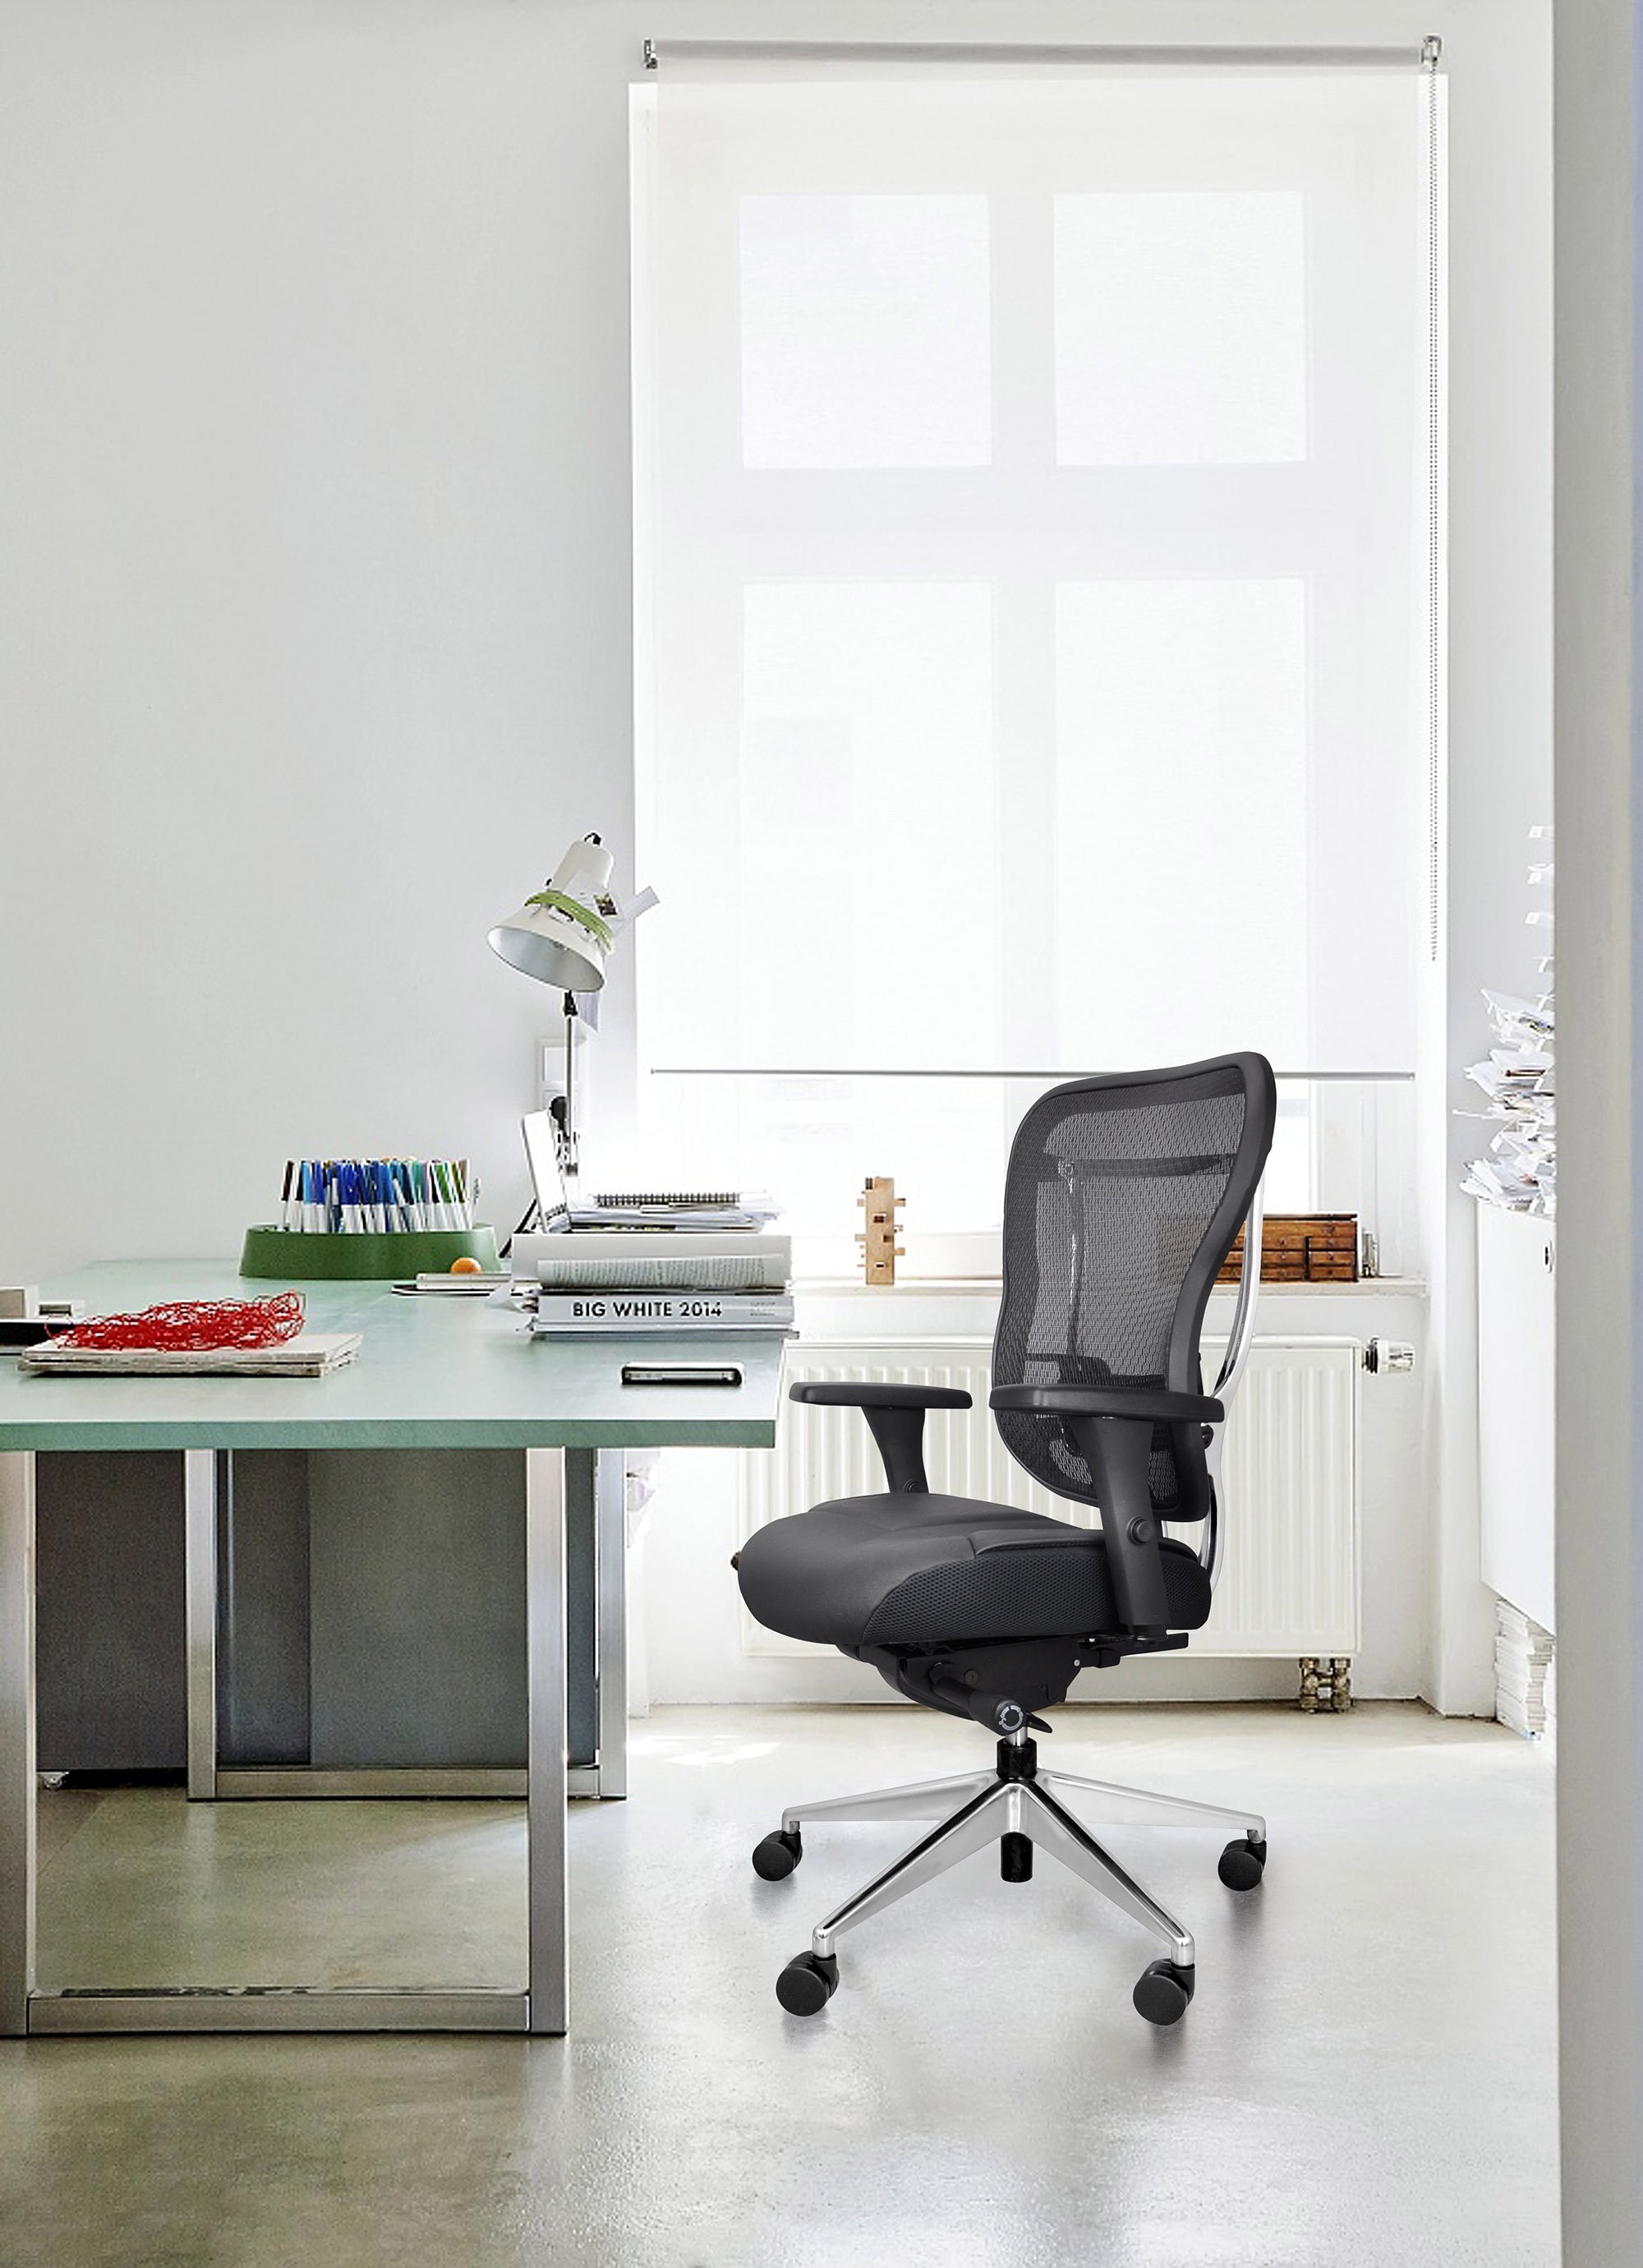 https://buzzseating.com/wp-content/uploads/2019/03/RIK-GL-leather-on-demand-task-chair-mesh-back-gray.jpg